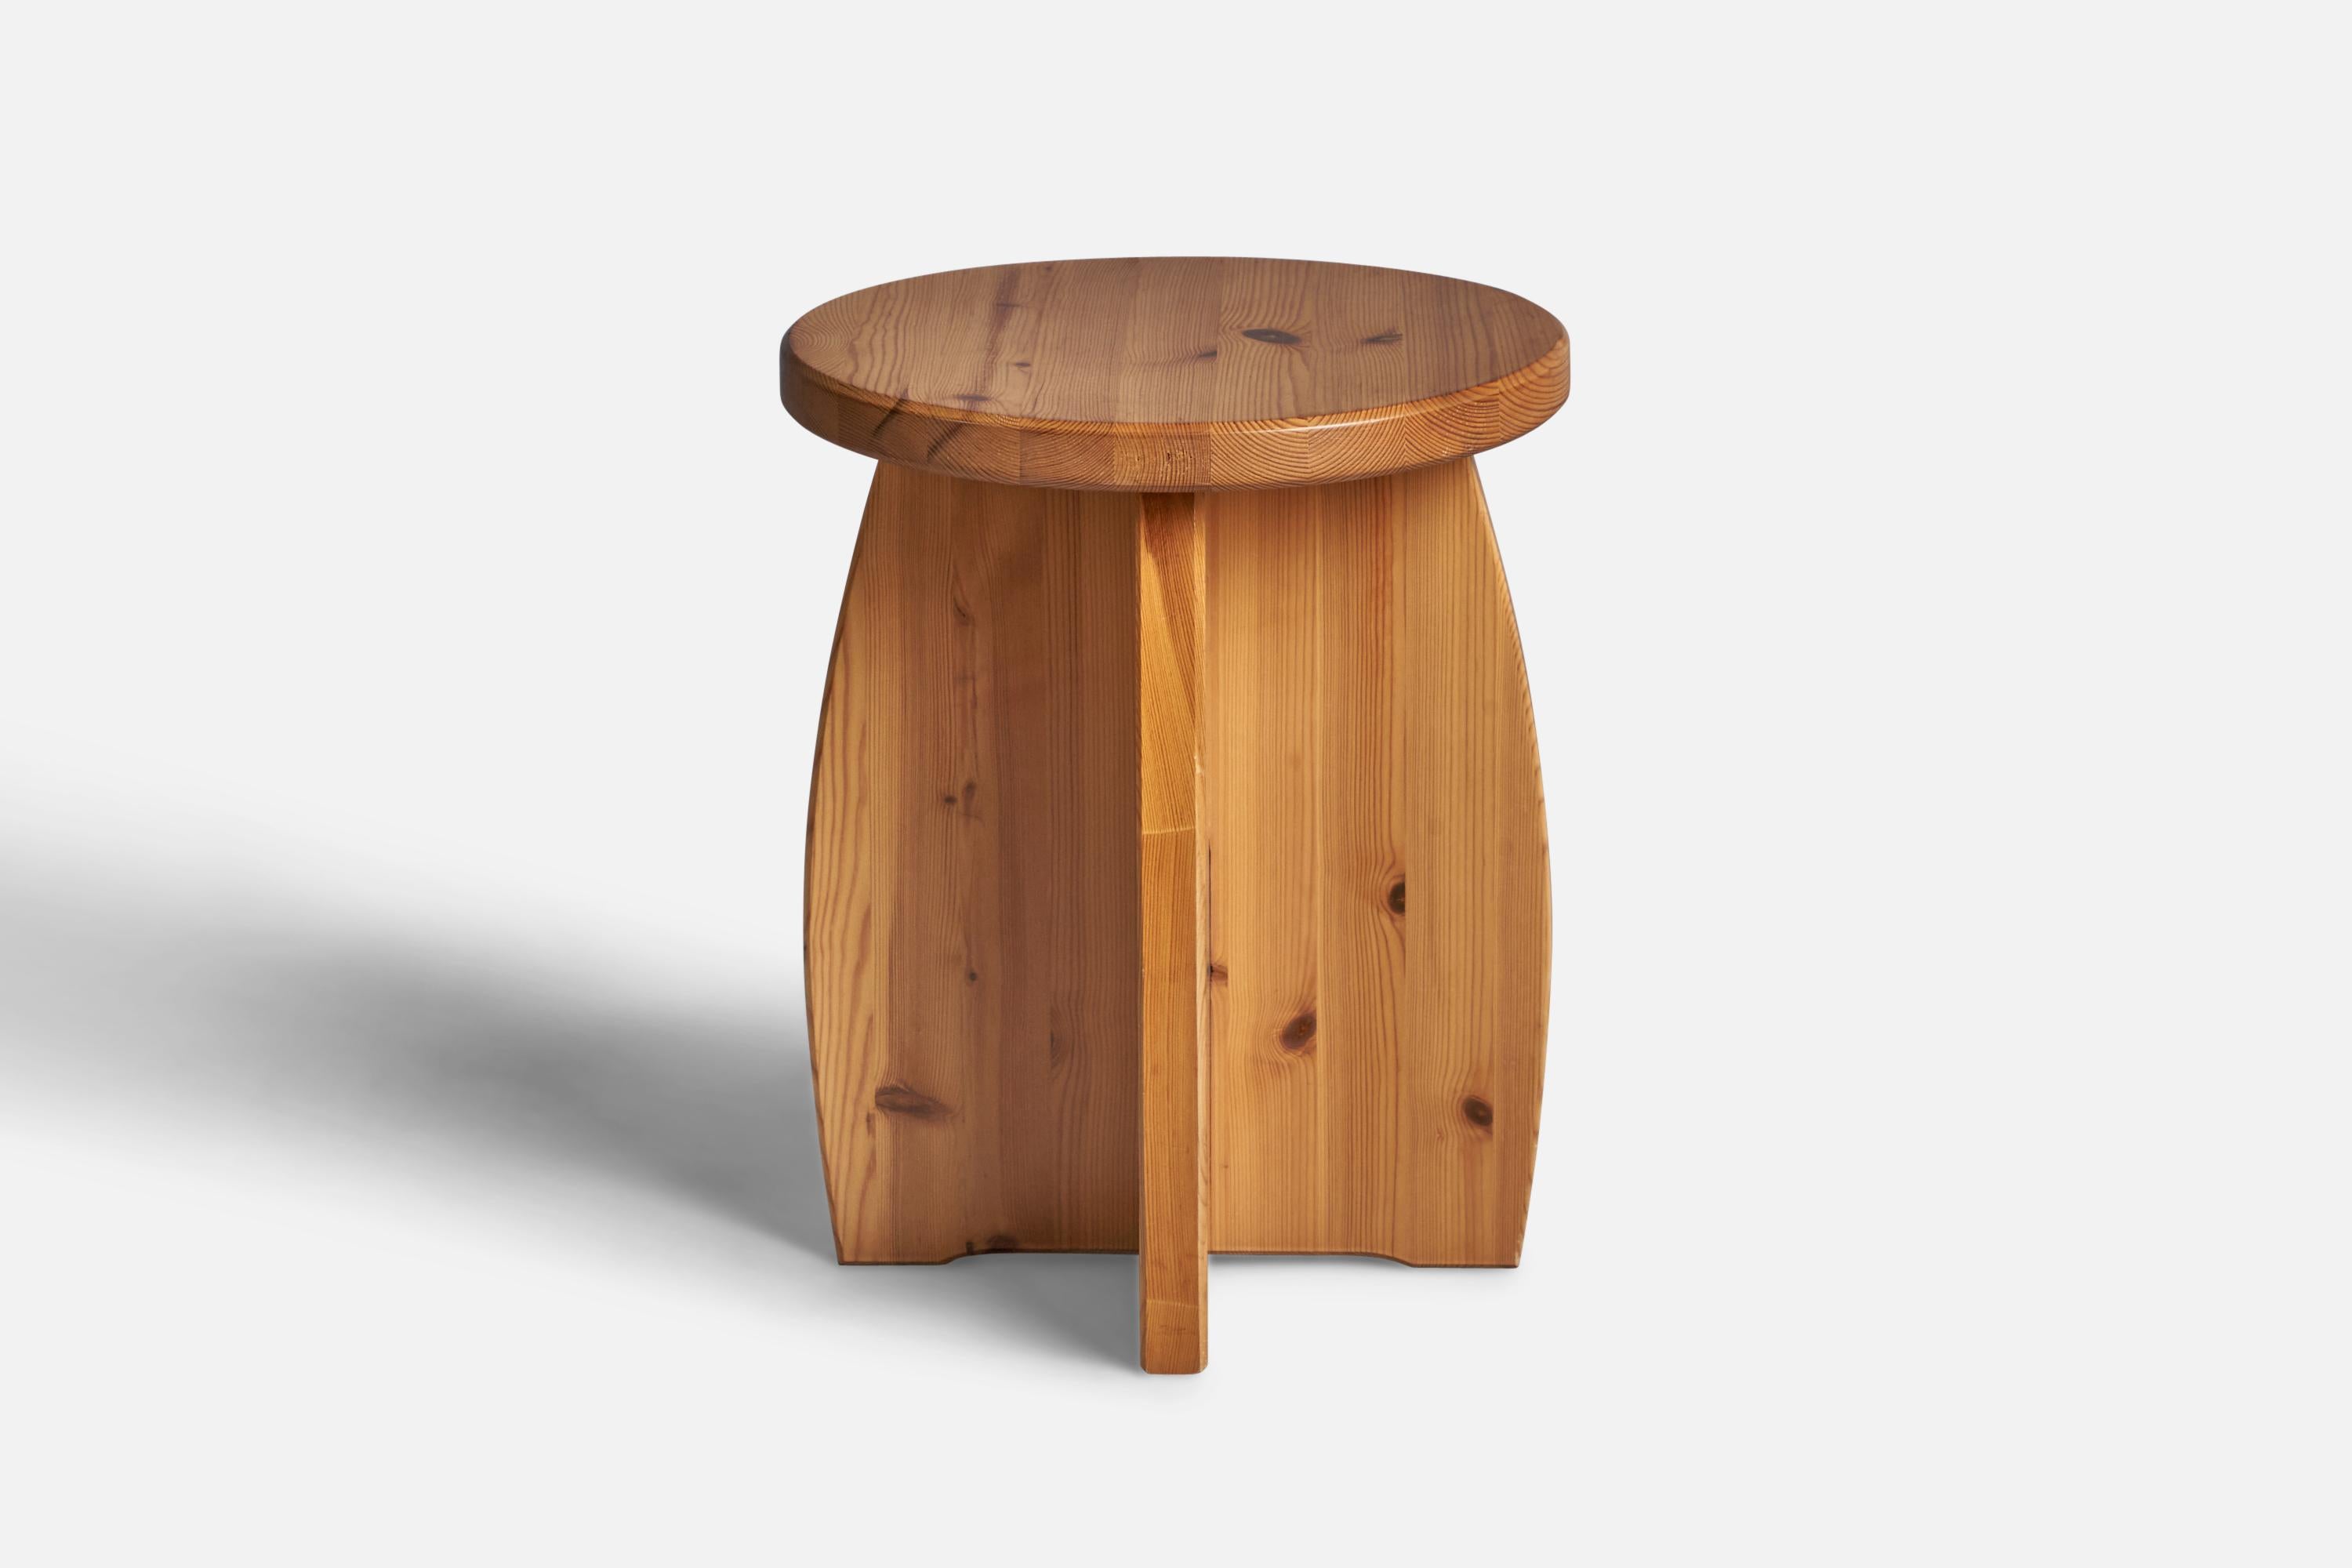 A solid pine stool or side table designed and produced in Sweden, 1970s.